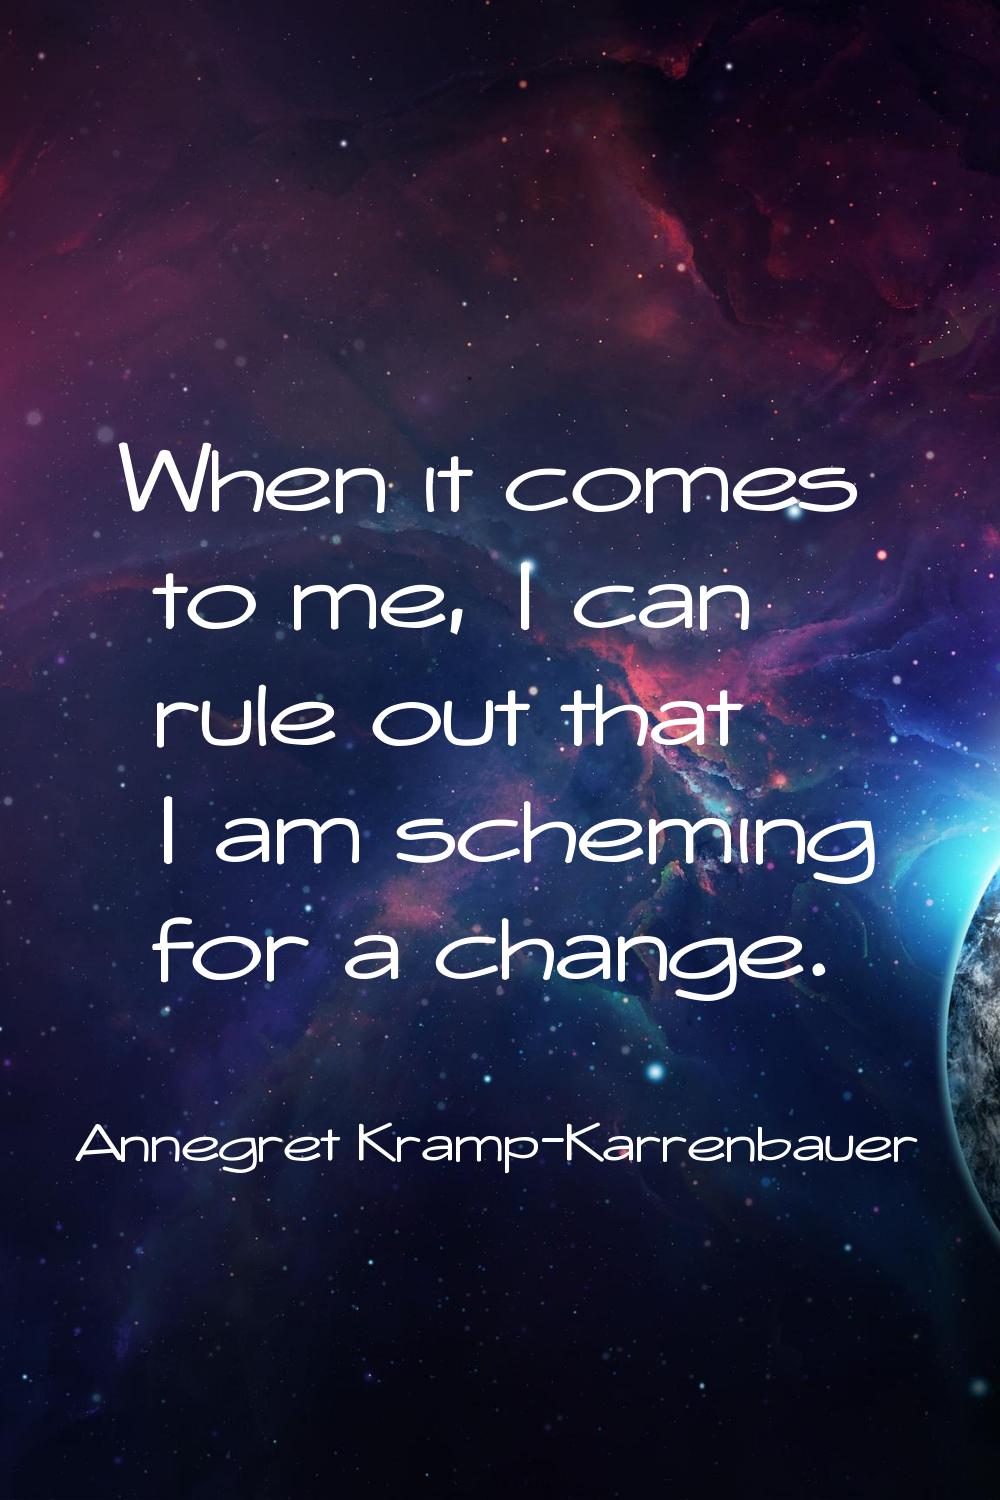 When it comes to me, I can rule out that I am scheming for a change.